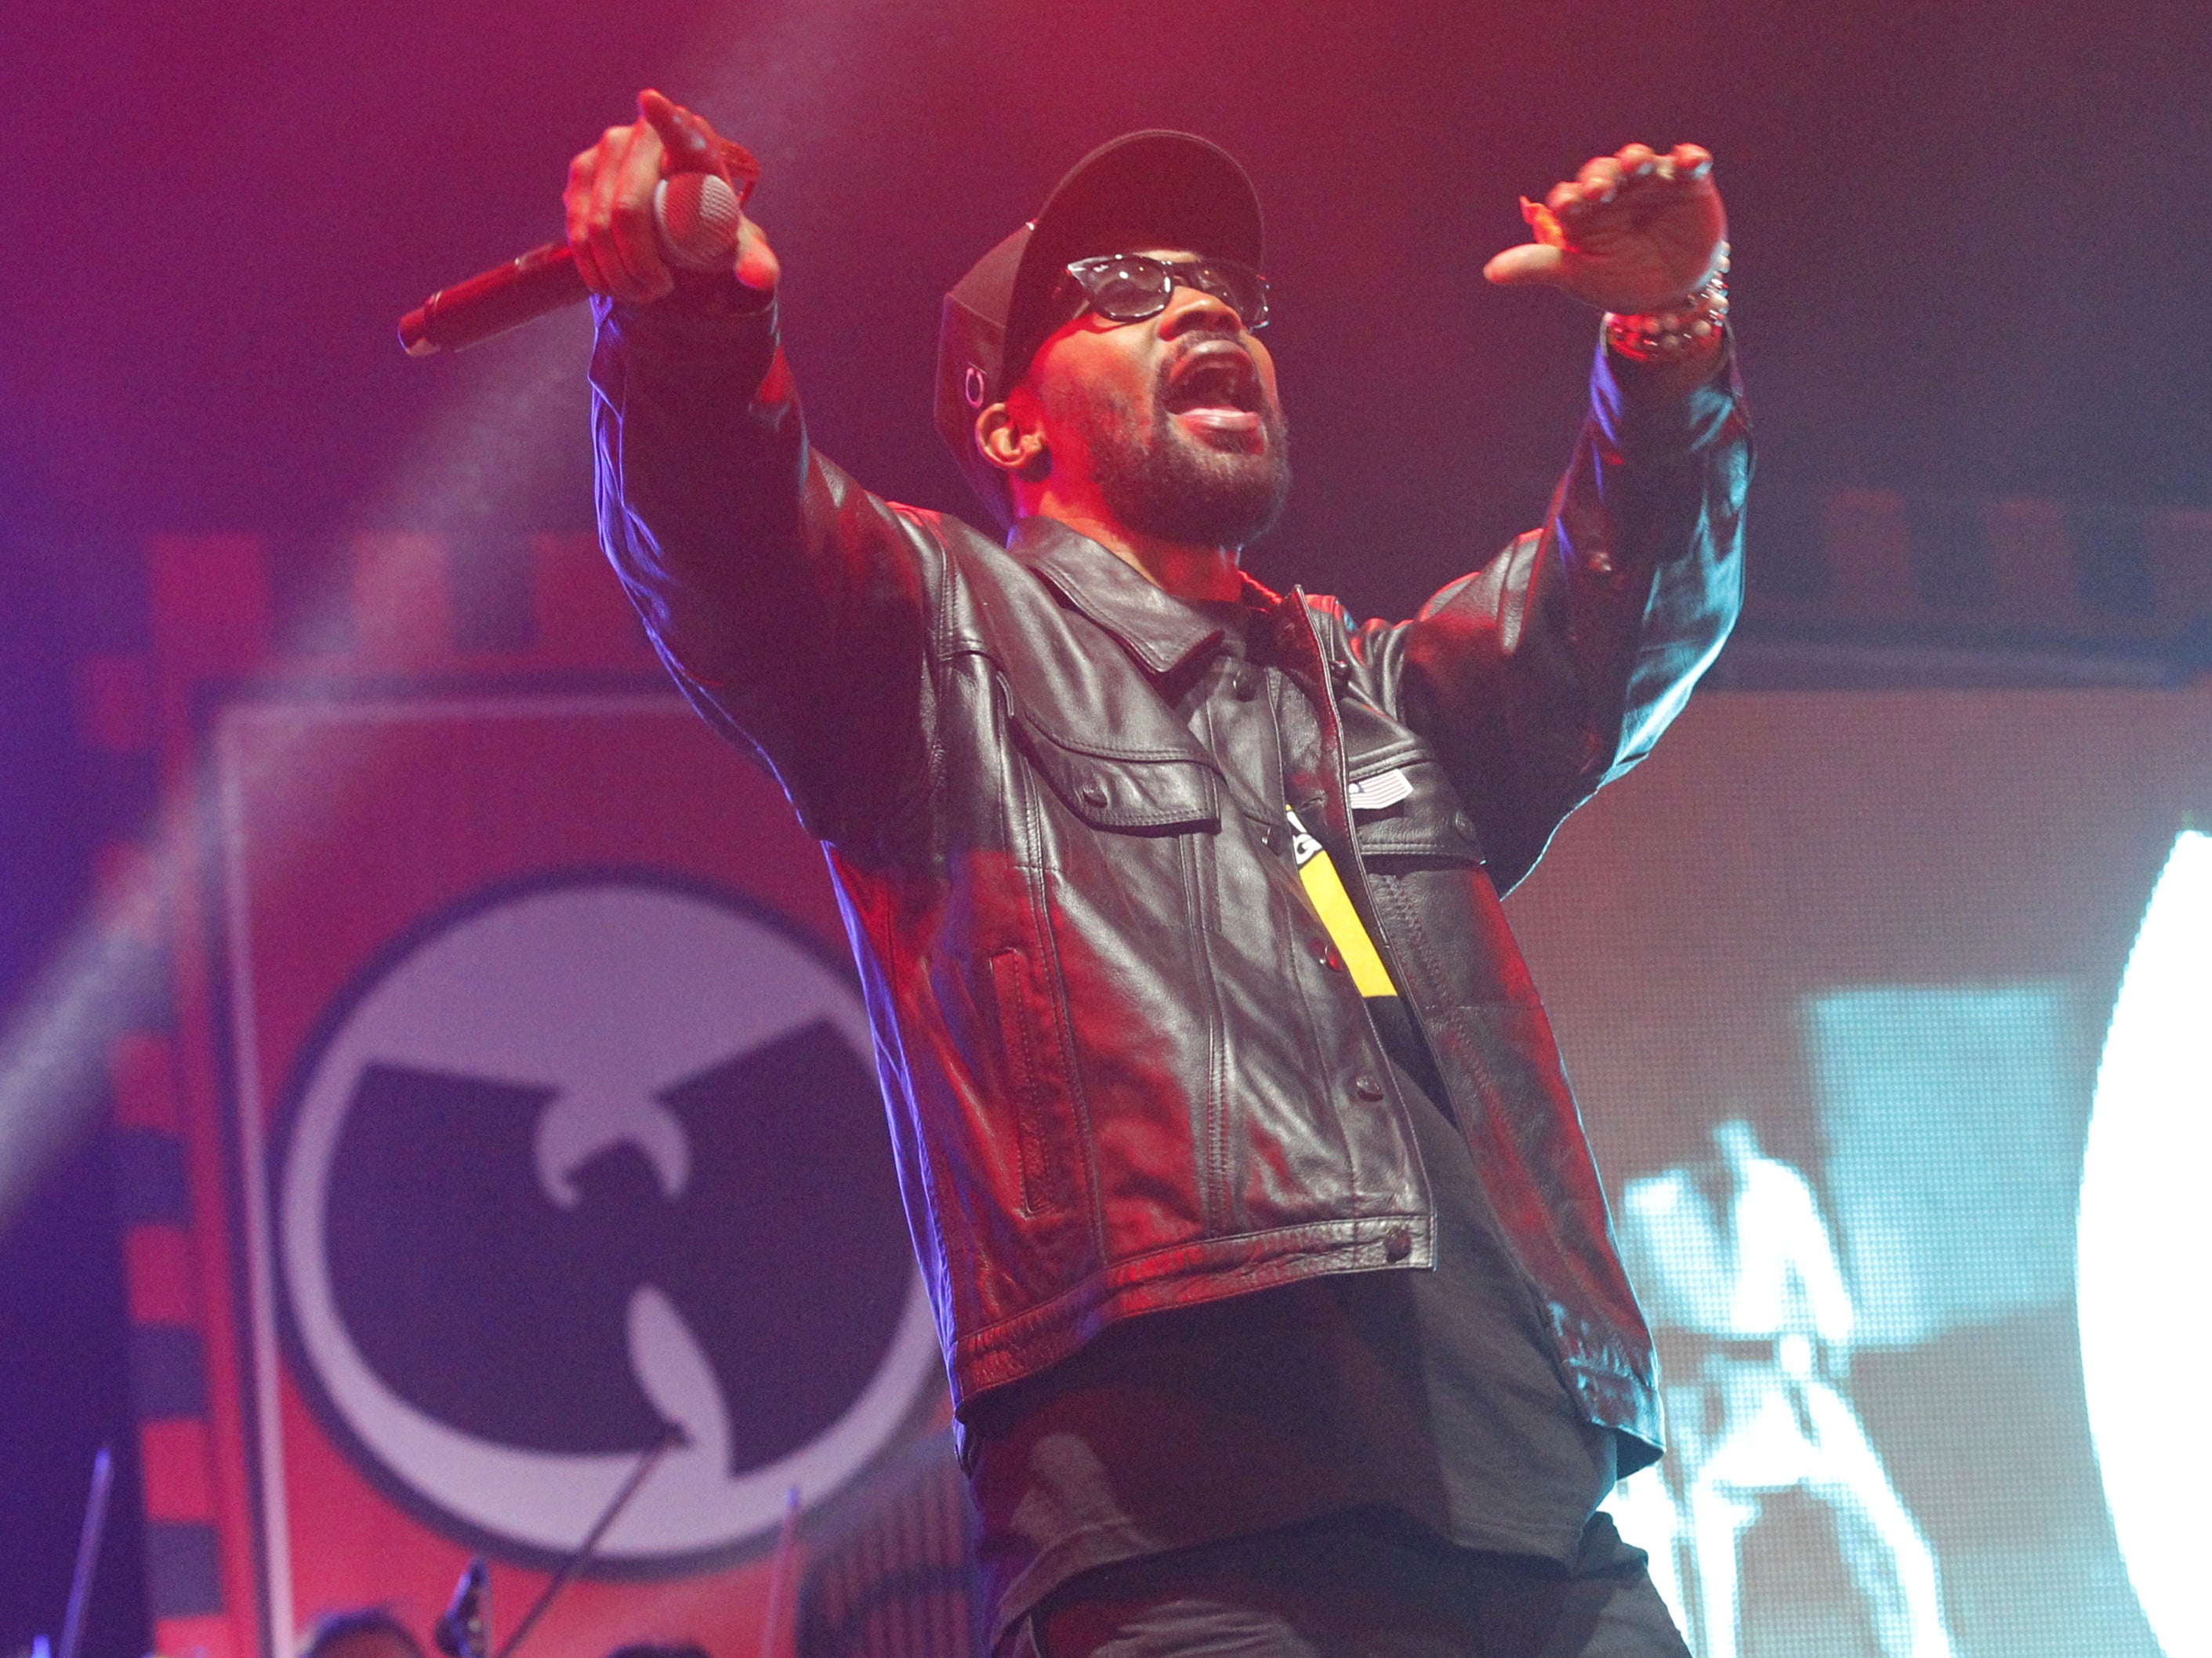 Wu-Tang Clan performing at the Coachella Music Festival in 2013